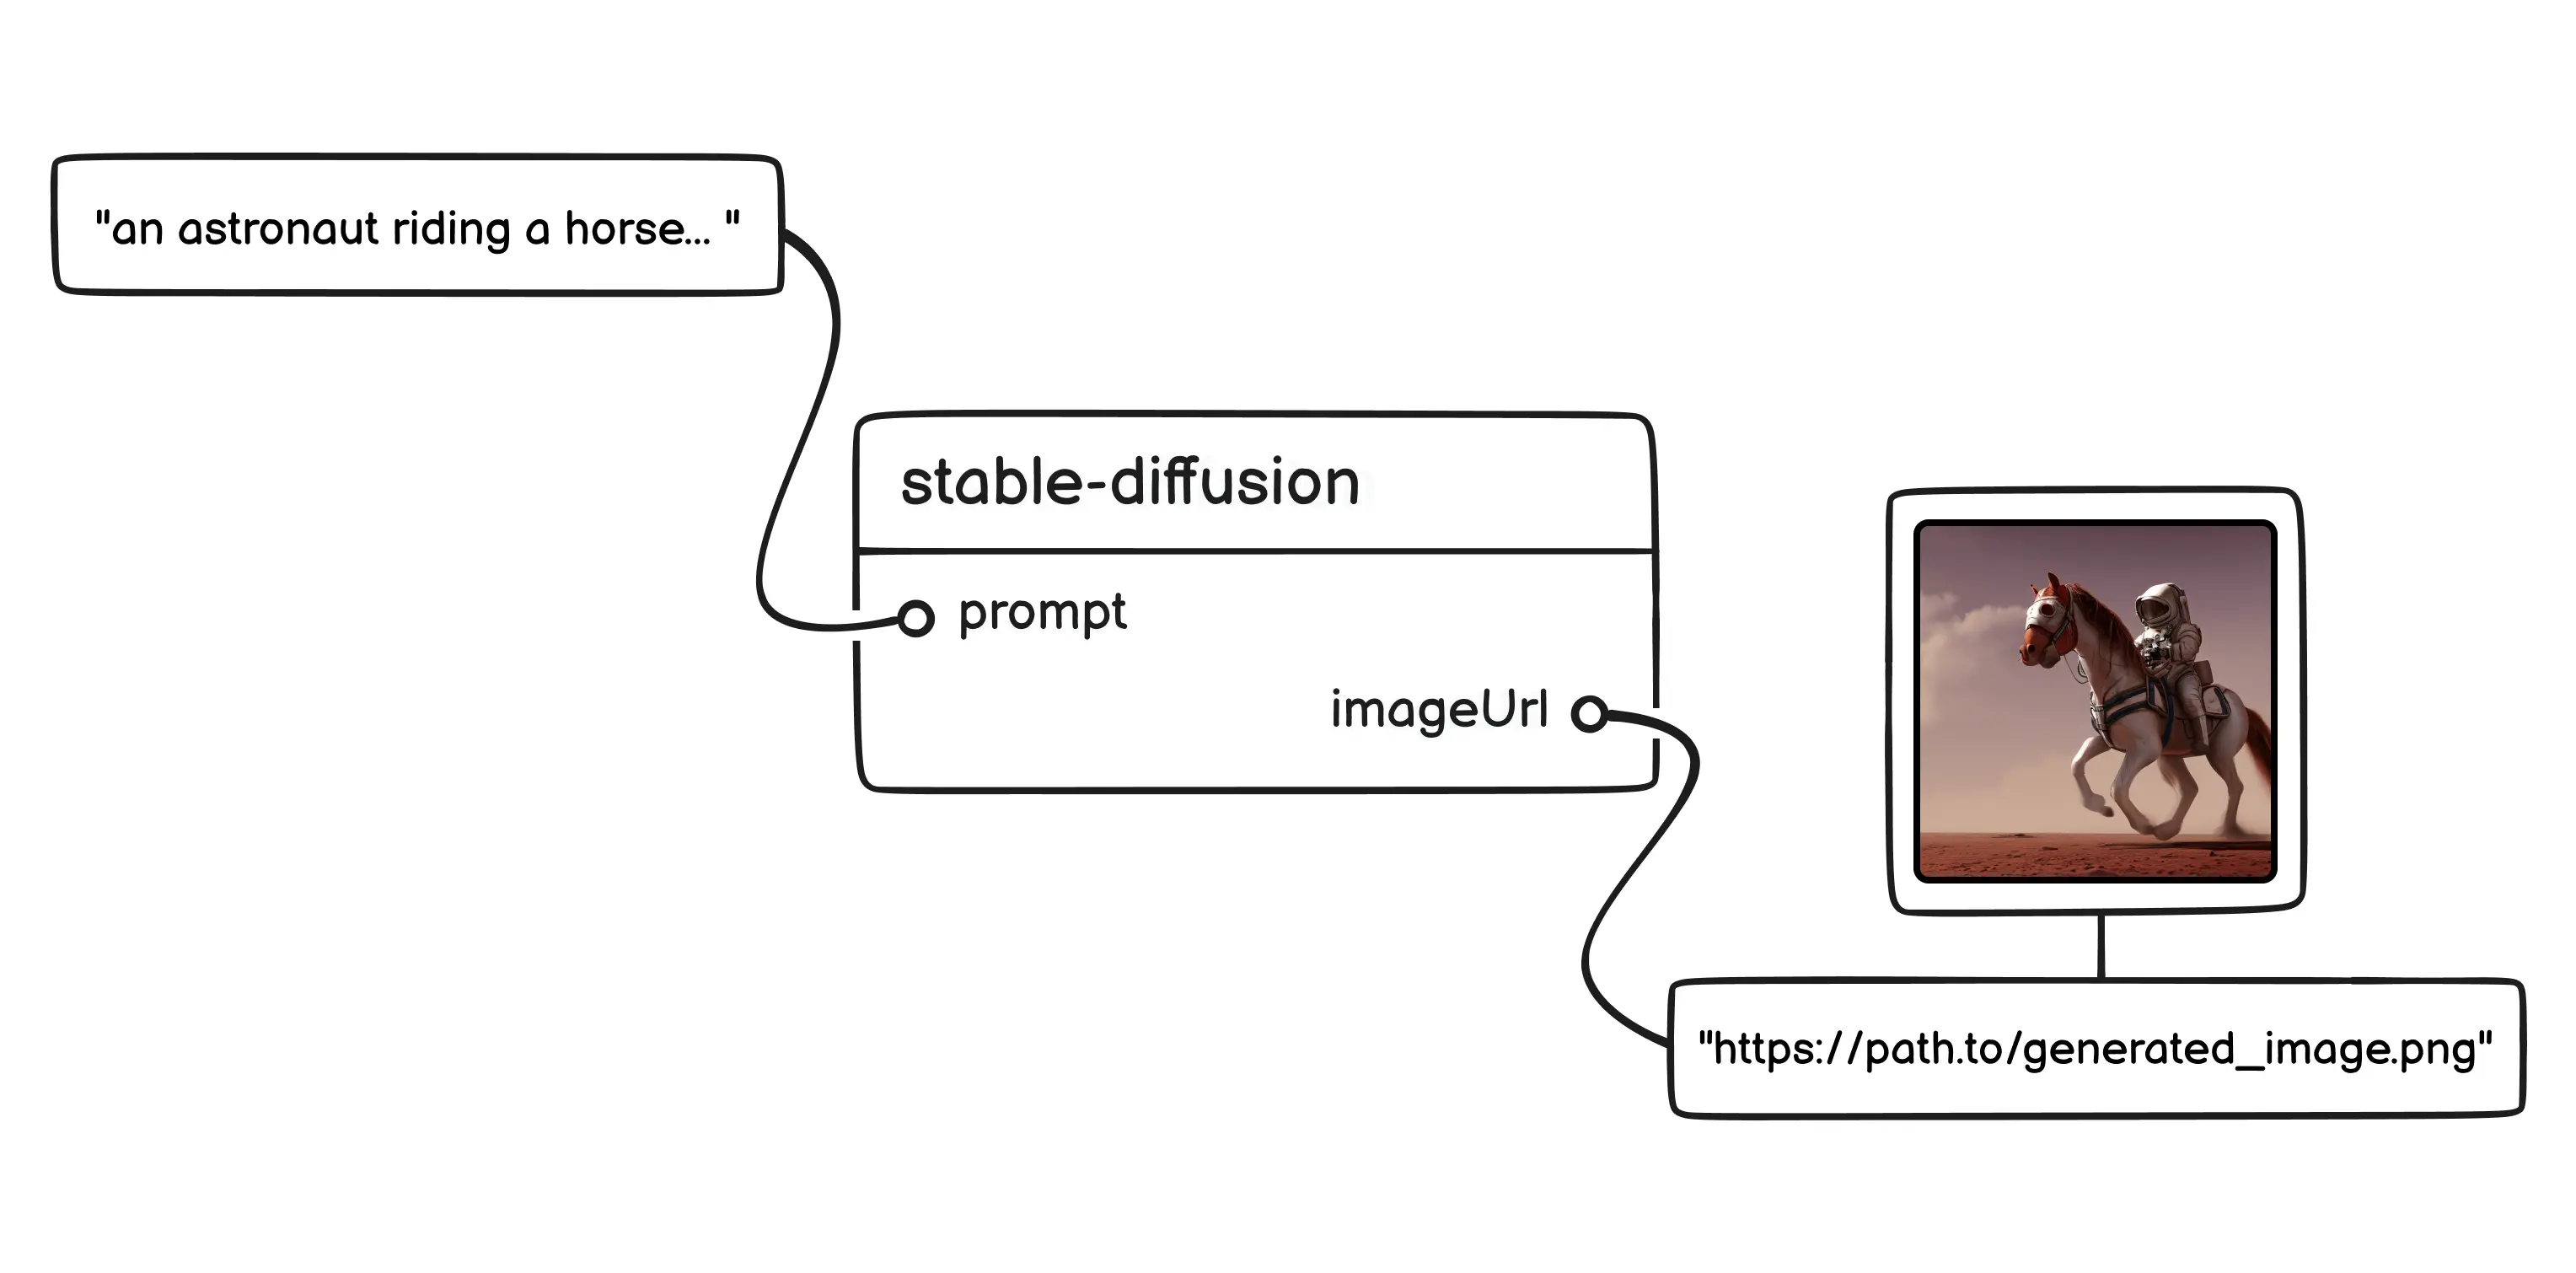 Simplified input/output diagram of stable-diffusion model.